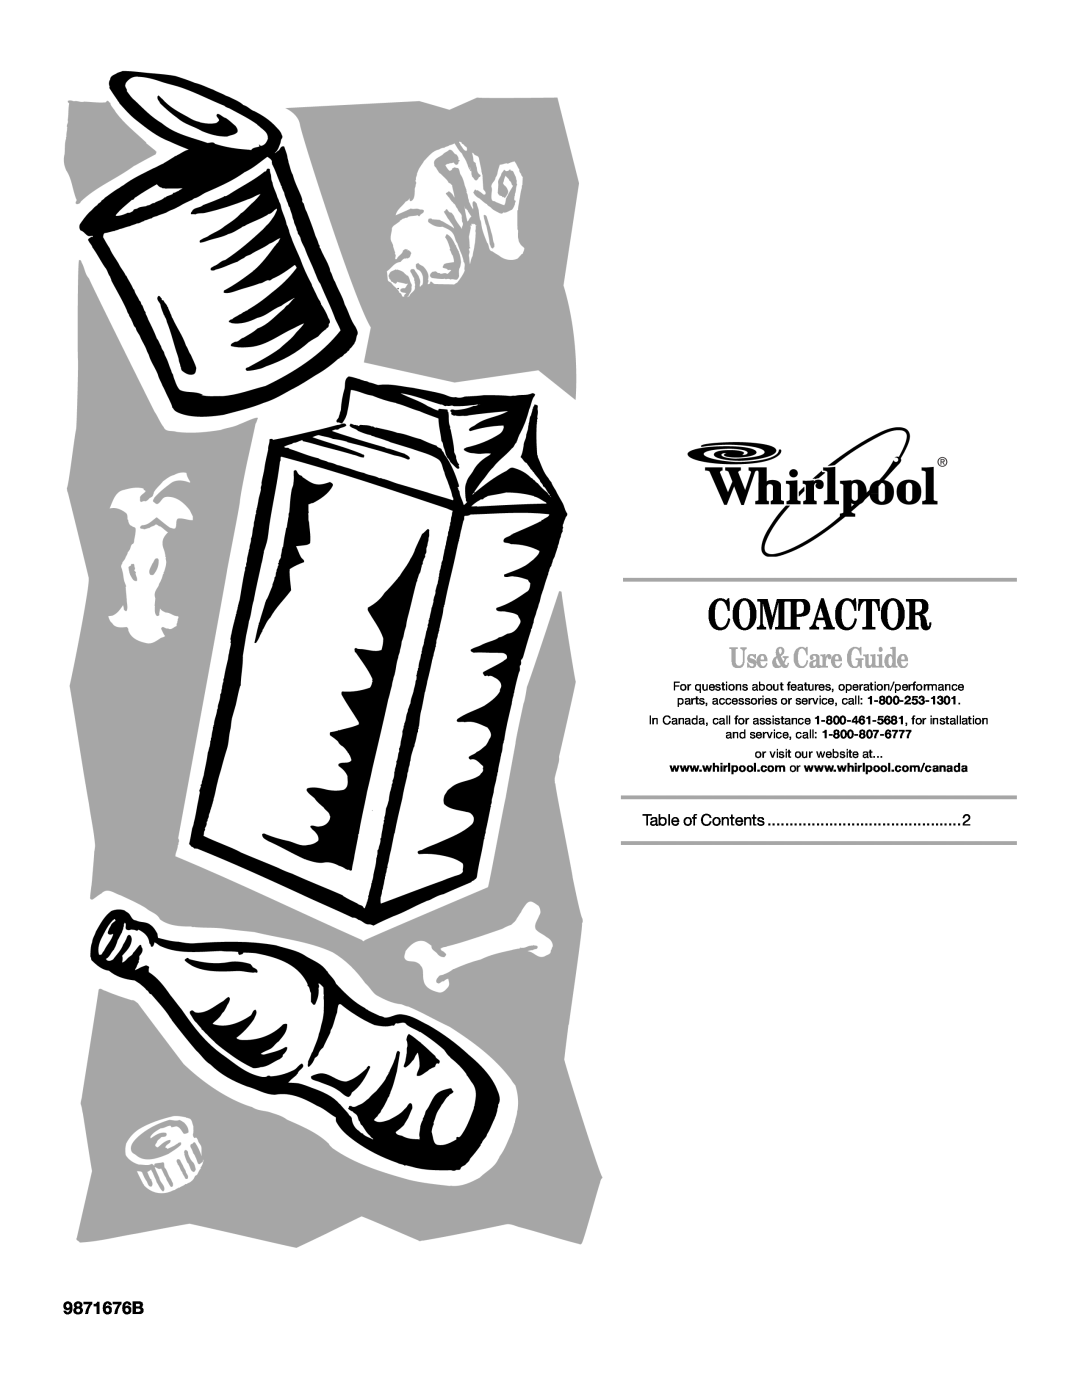 Whirlpool Compactor manual Use & Care Guide, 9871676B, In Canada, call for assistance 1-800-461-5681, for installation 